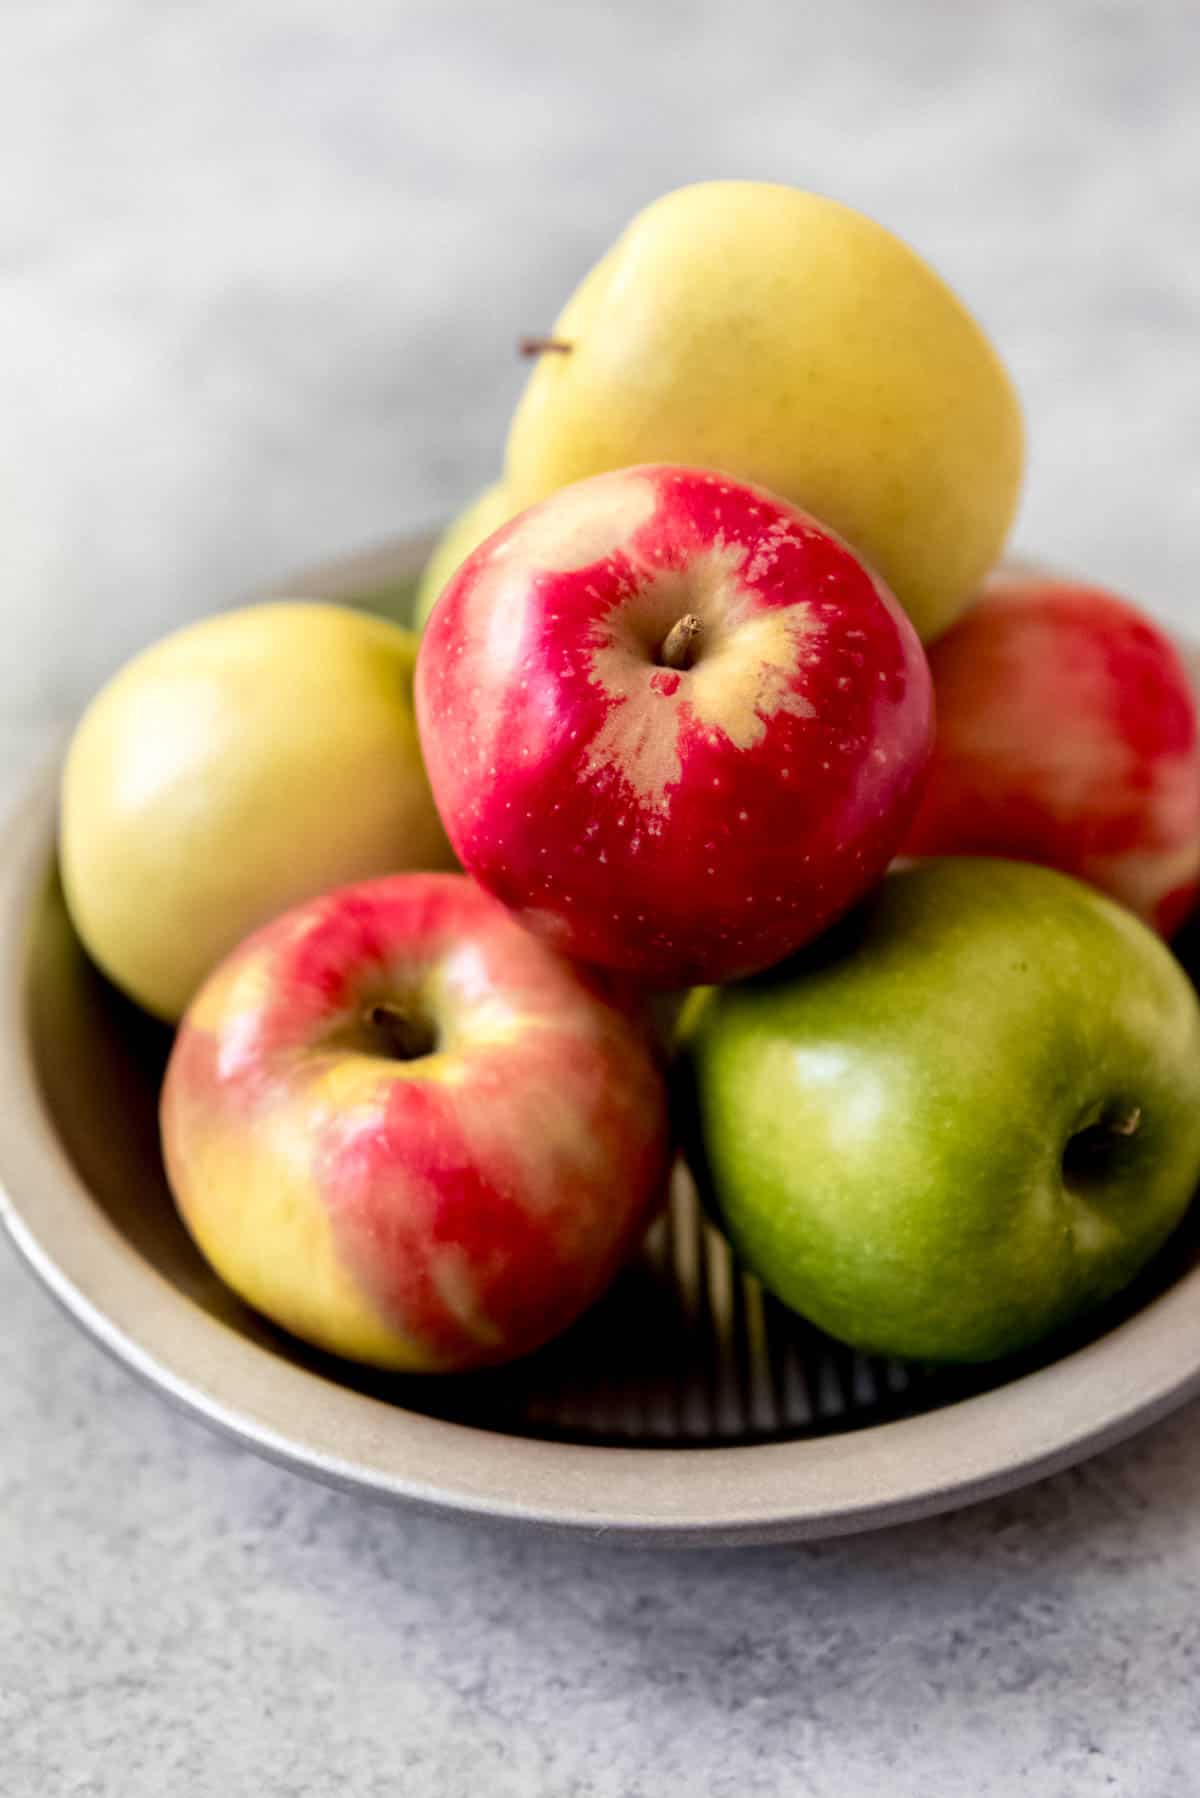 An image of Granny Smith, Pink Lady, and Golden Delicious apples in a pie plate.